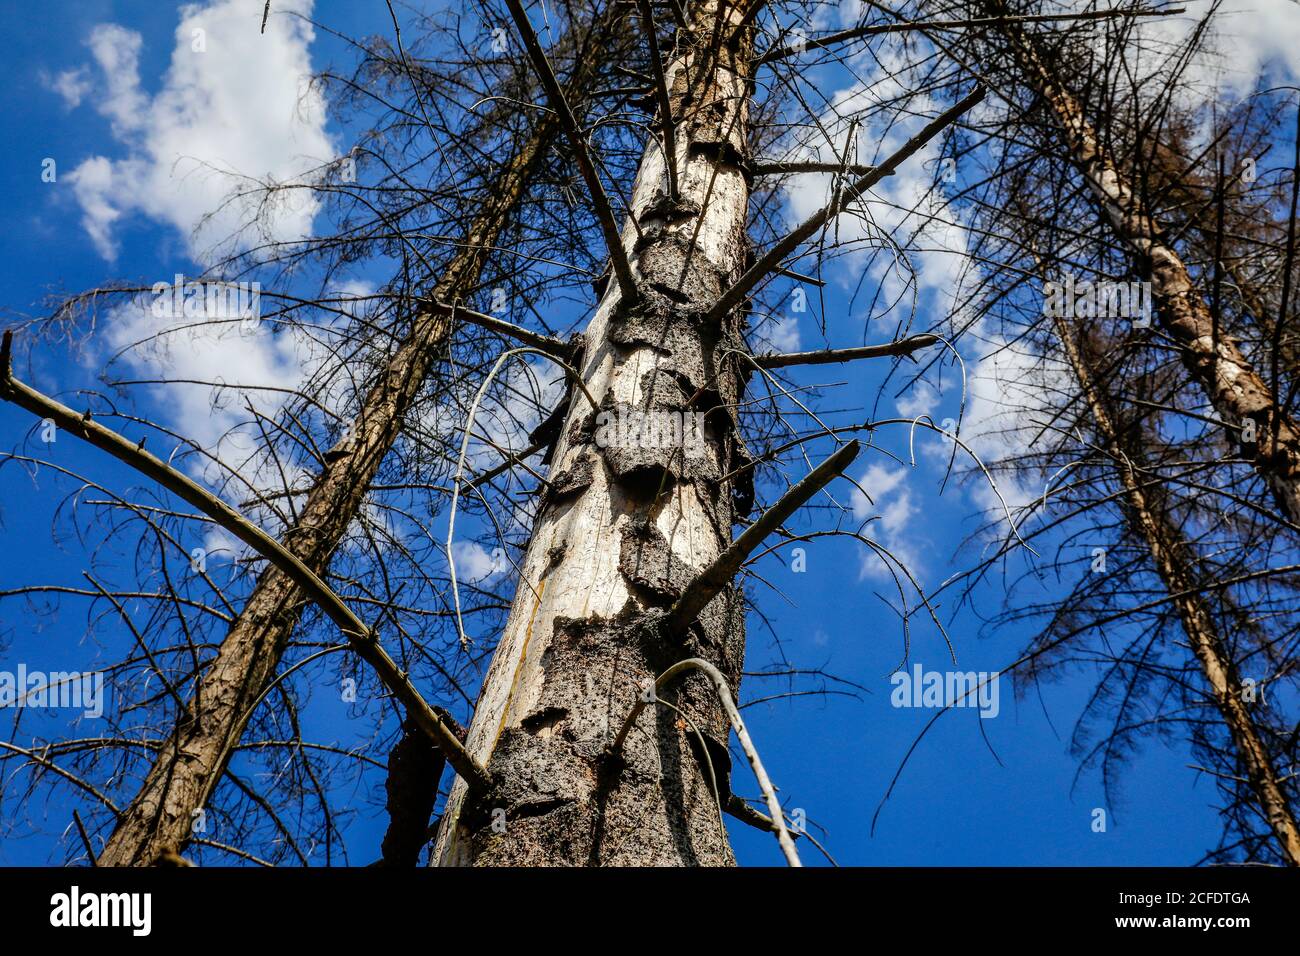 Bonn, North Rhine-Westphalia, Germany - Forest dieback in the Kottenforst, drought and bark beetles damage the spruce trees in the coniferous forest. Stock Photo